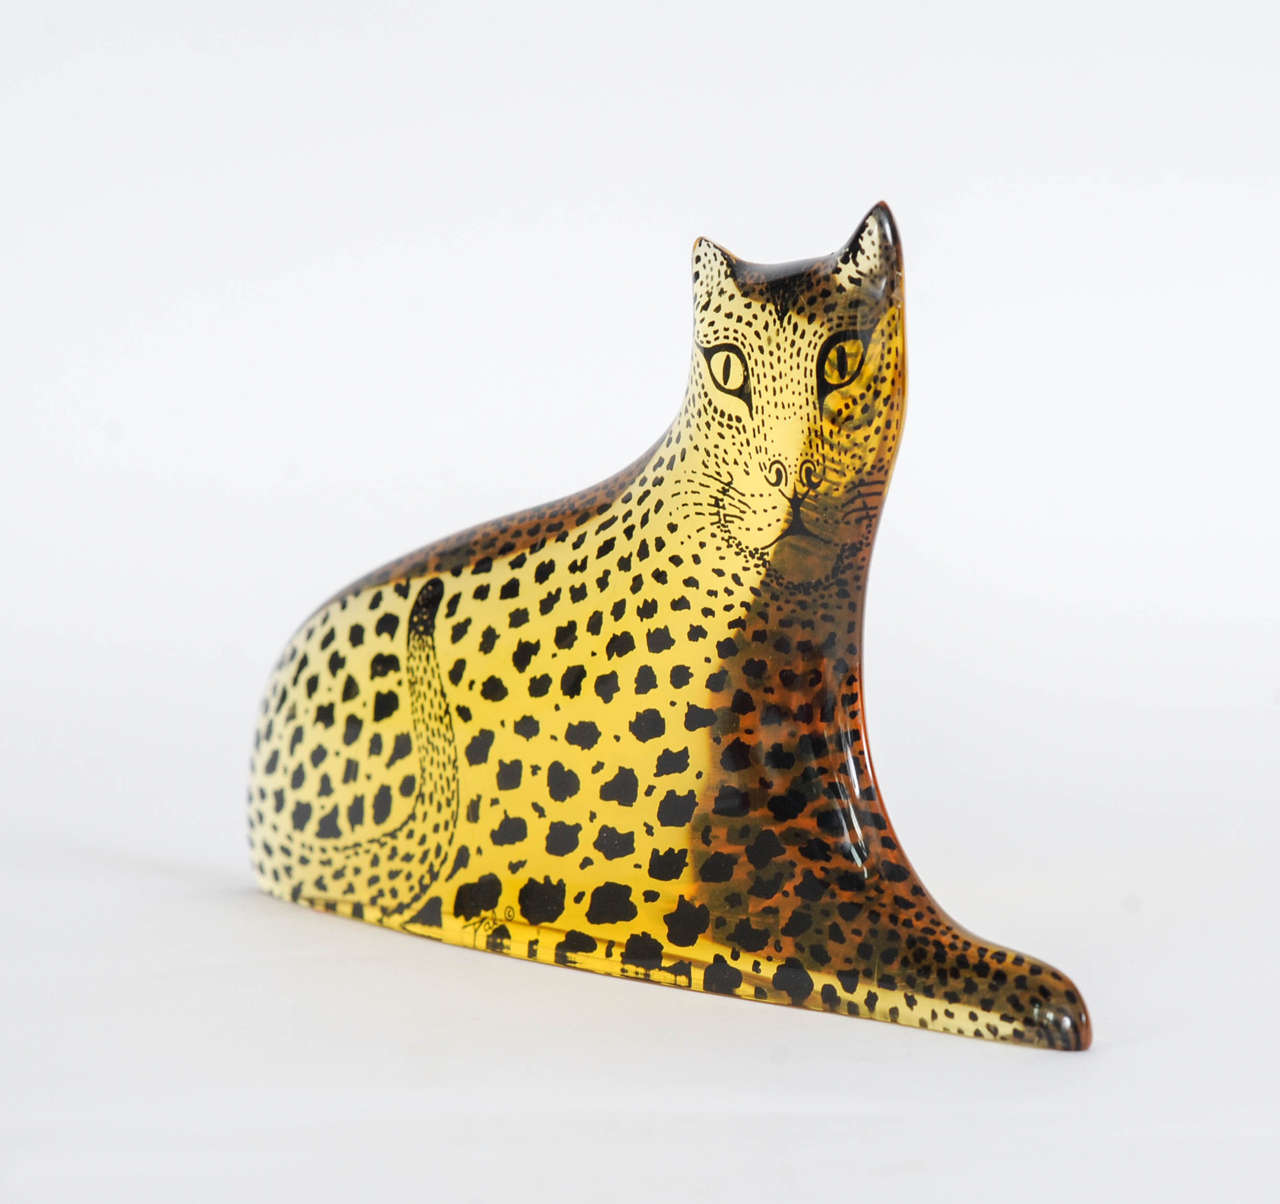 Stunning Leopard in lucite made by Abraham Palatnik.

The Brazilian artist Abraham Palatnik (1928) was the founder of the technological movement in Brazilian art, and a pioneer in making kinetic sculptures. 
In the late 40th (1949) he created his